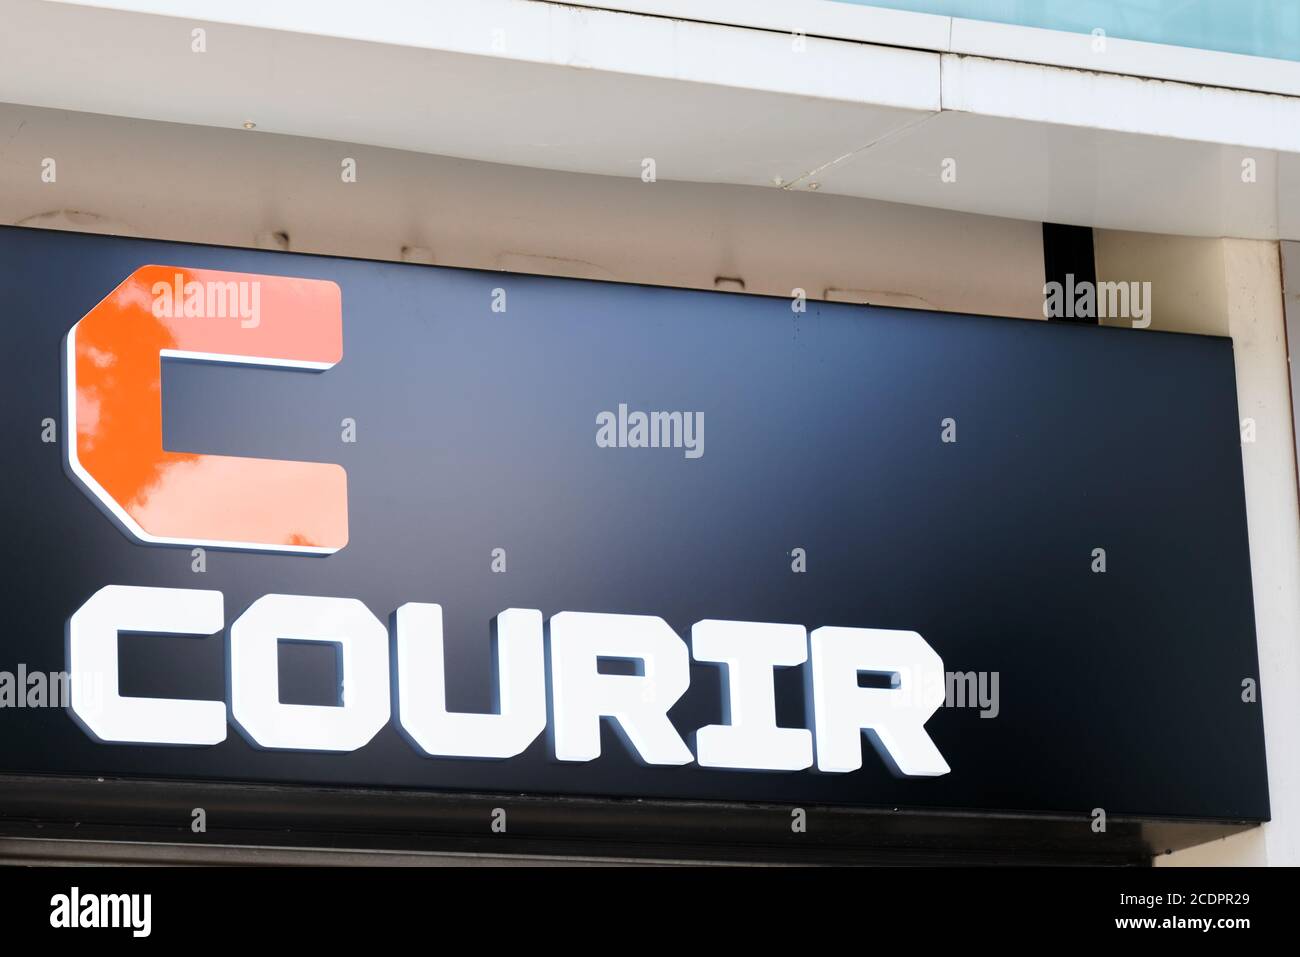 Bordeaux , Aquitaine / France - 08 25 2020 : c courir logo and text sign  store shoes sneaker sportswear and footwear retailer Stock Photo - Alamy